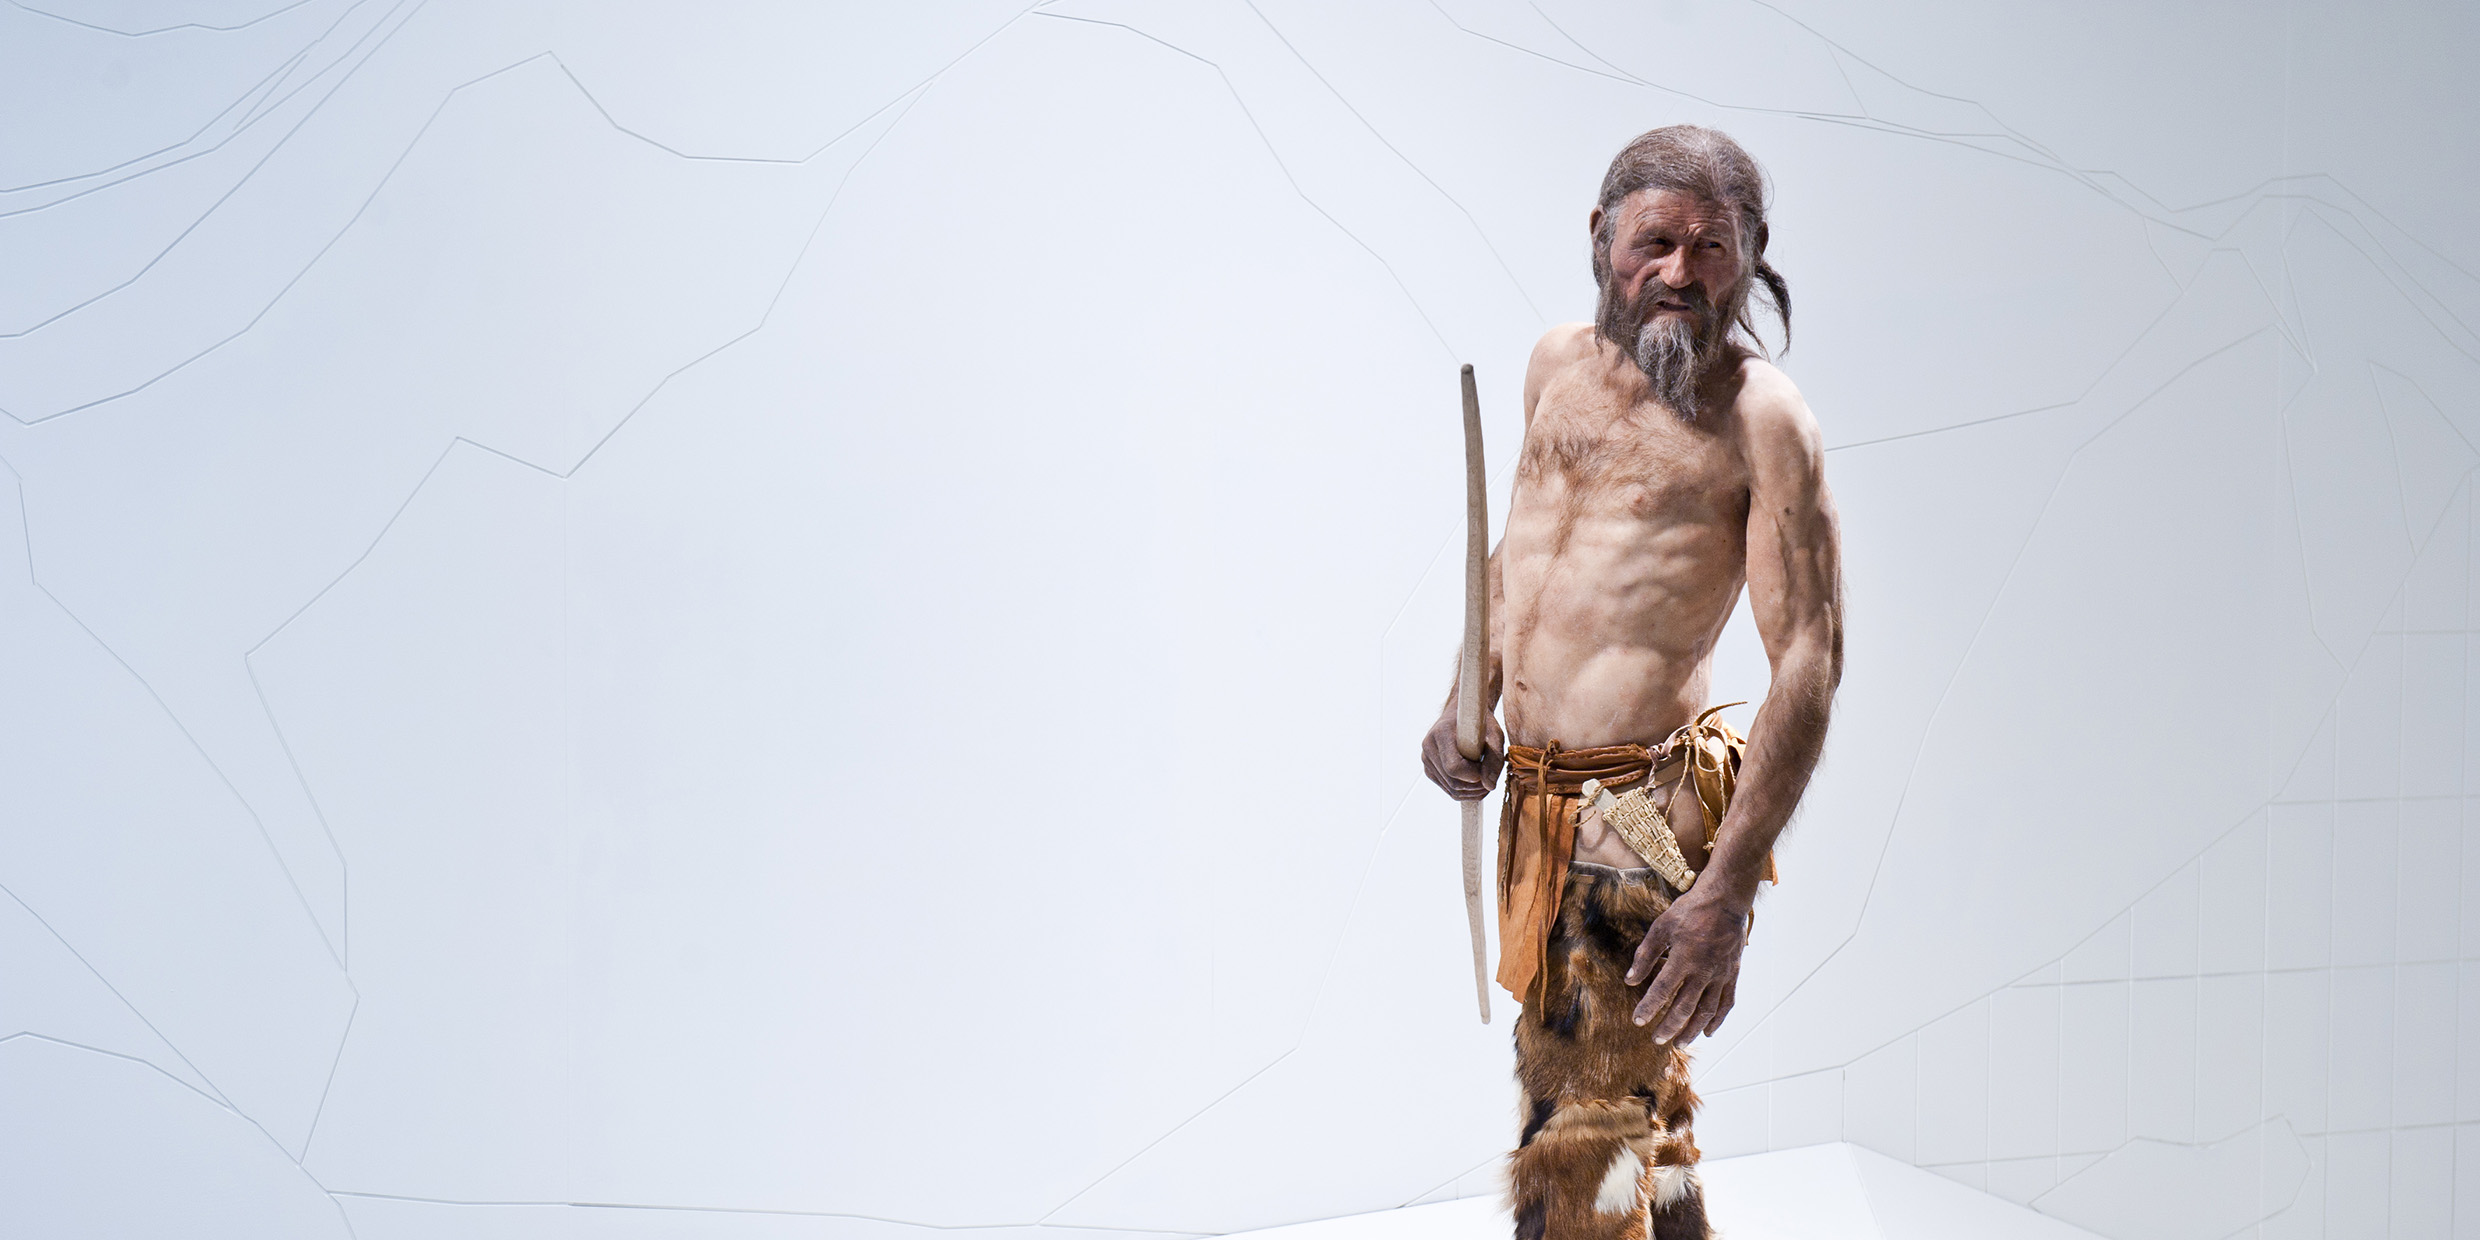 Image of a bare-chested man holding a wooden spear and wearing animal skins